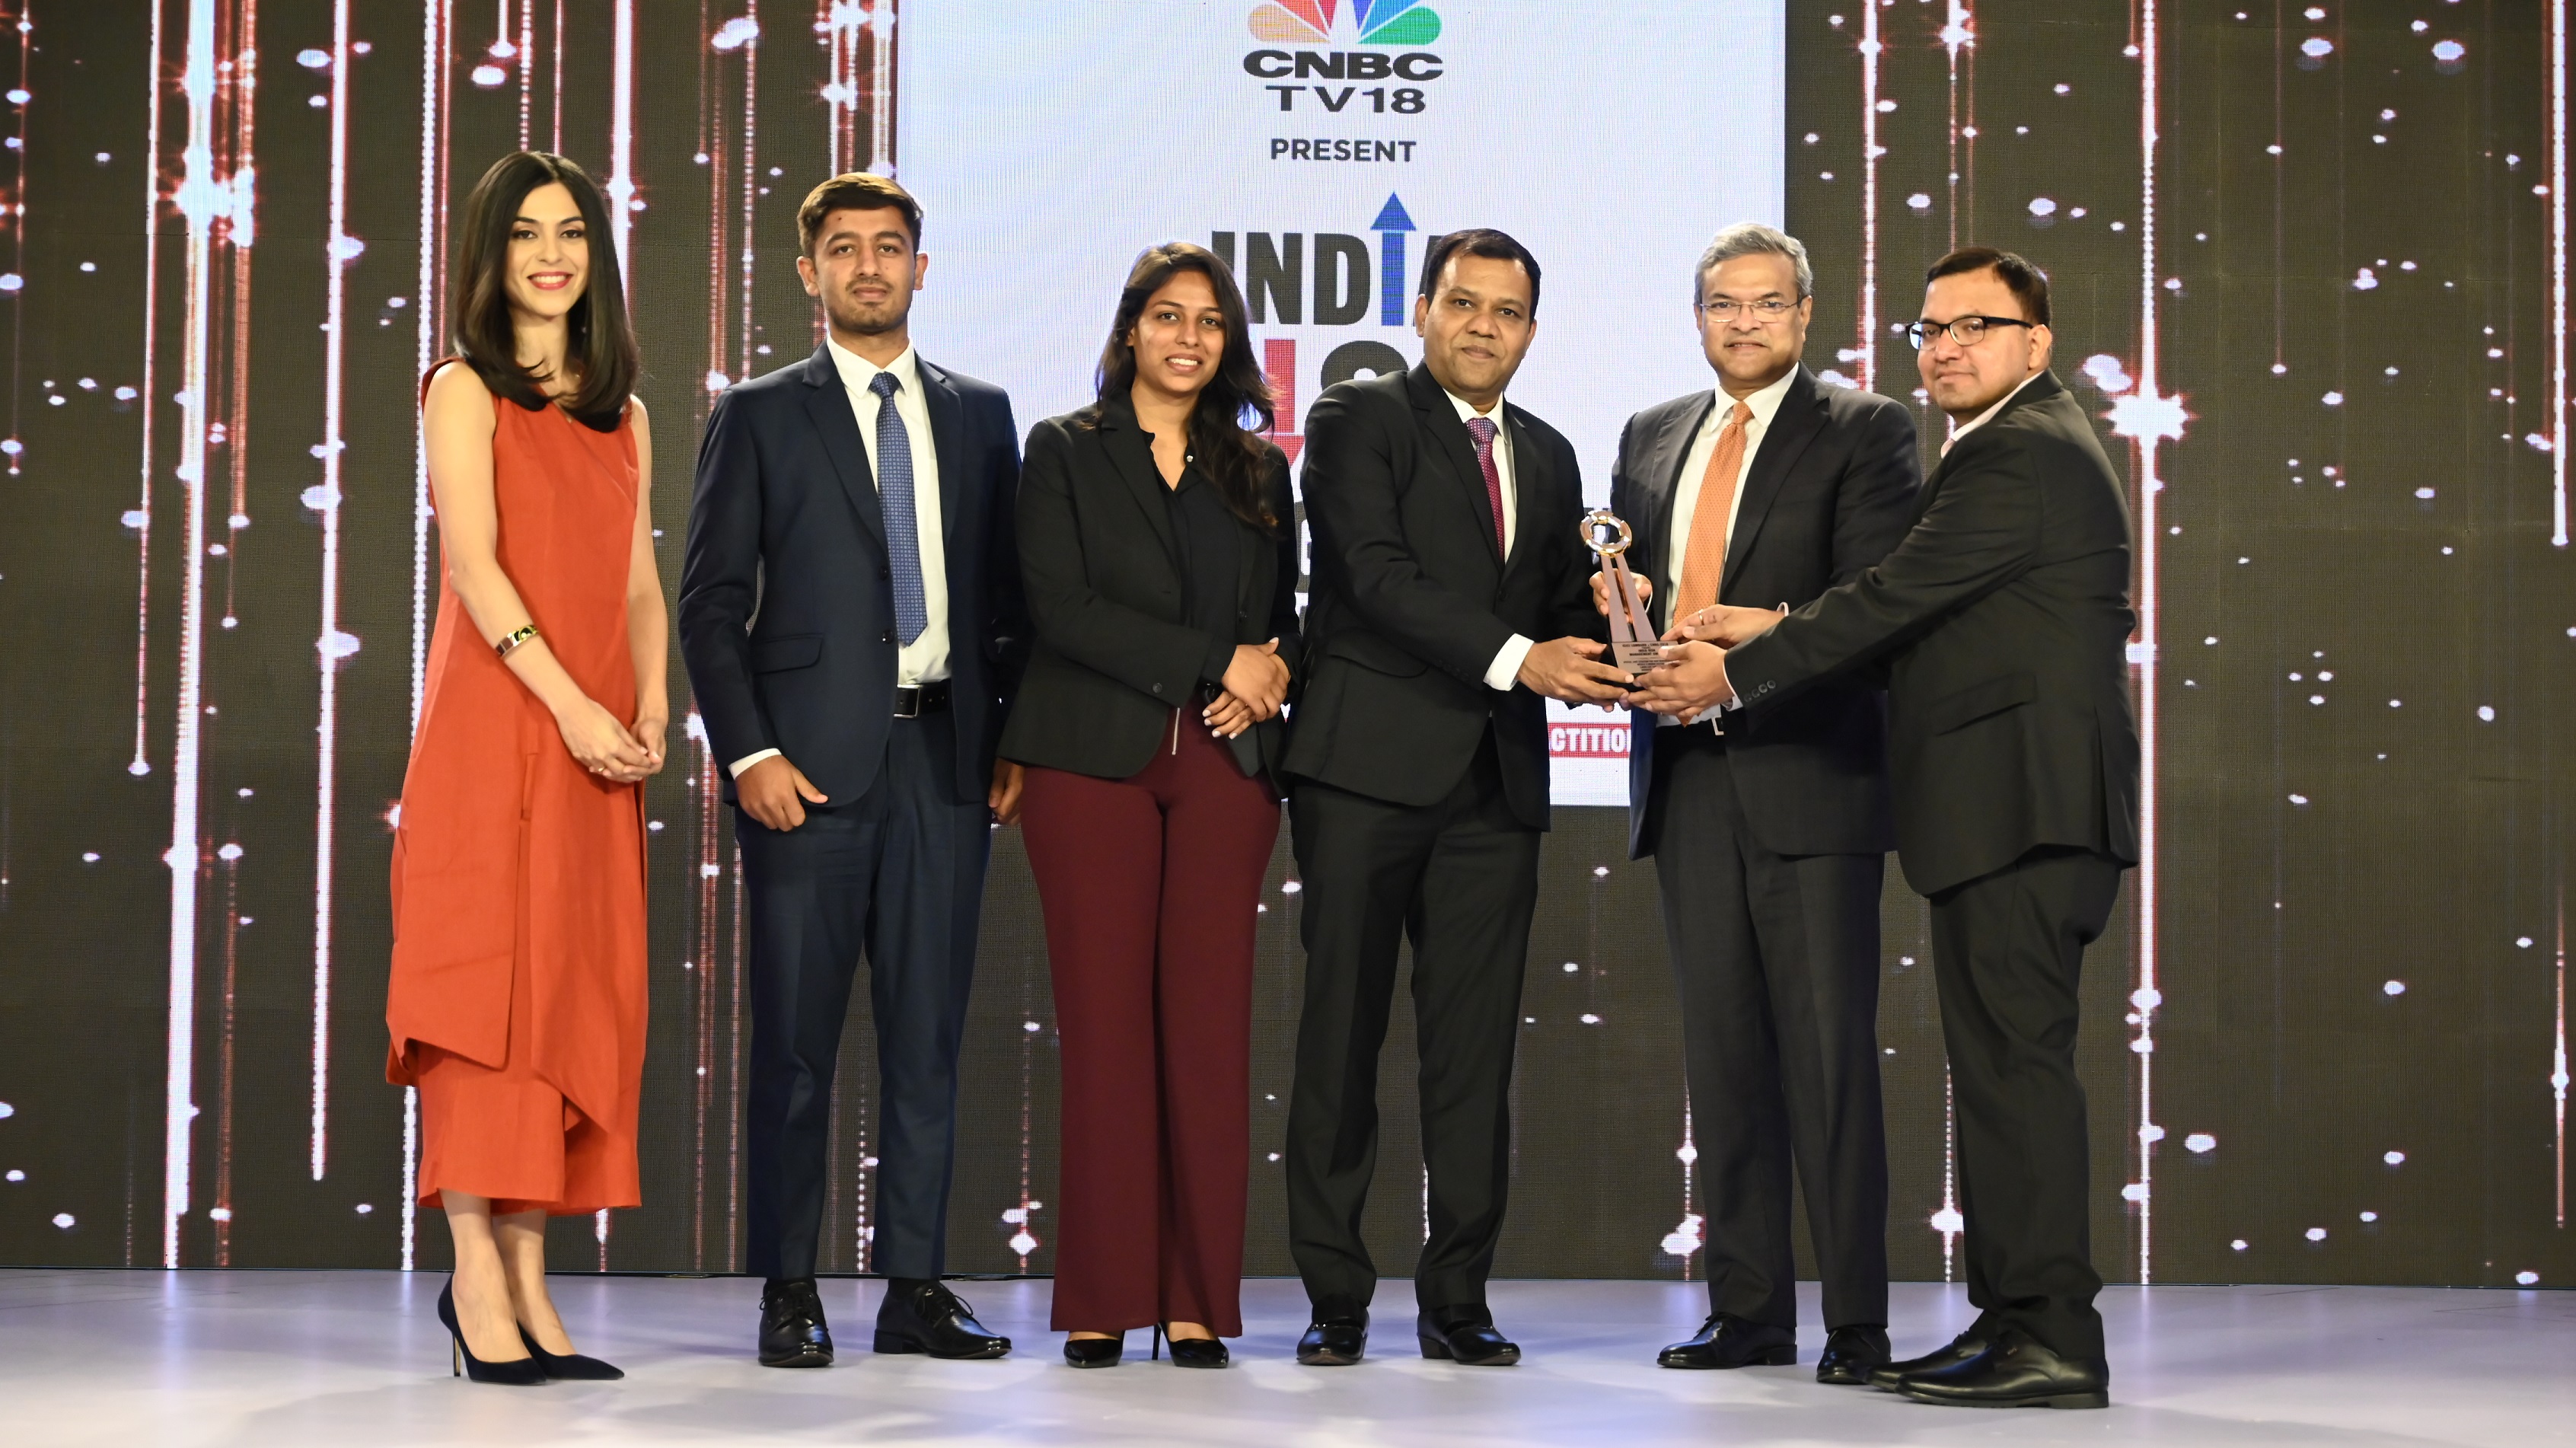 Double sweep for Hindustan Zinc, wins ‘Masters of Risk Jury Award in Metals & Mining and ESG Specialization’ at India Risk Management Awards